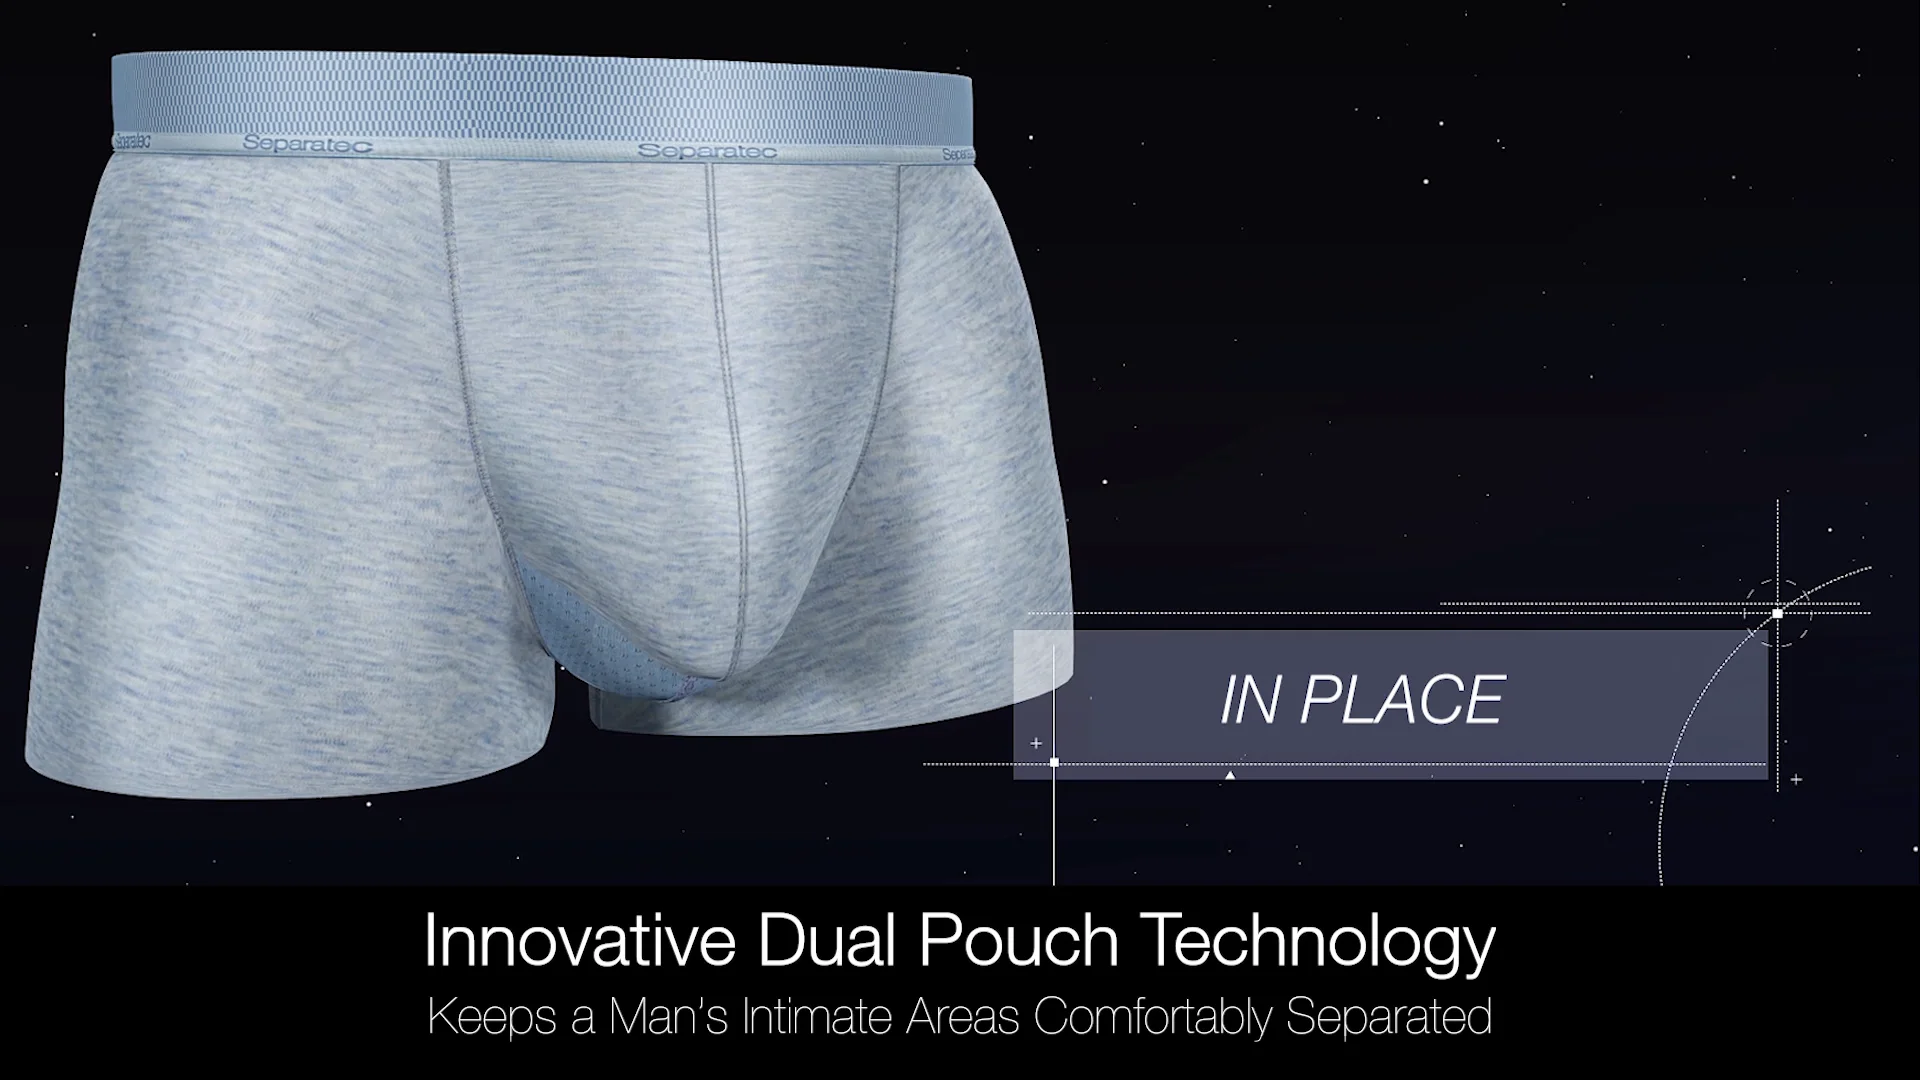 SEPARATEC DUAL POUCH SYSTEM VIDEO on Vimeo